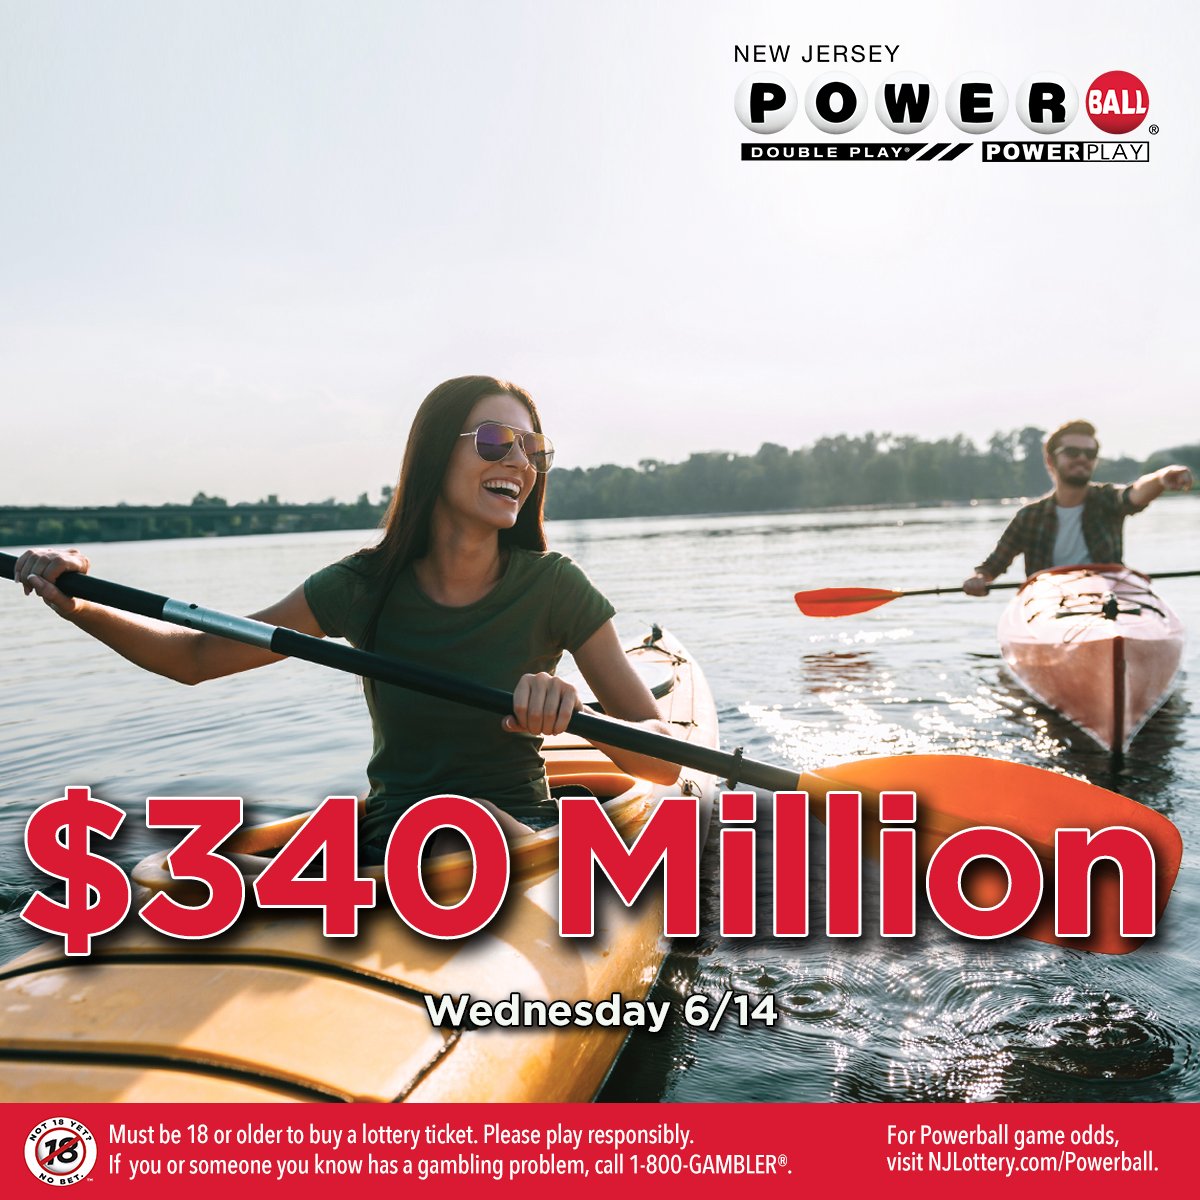 Canoe believe Wednesday’s Powerball jackpot is up to $340,000,000?! Seas the moment and get your ticket today!  🚣